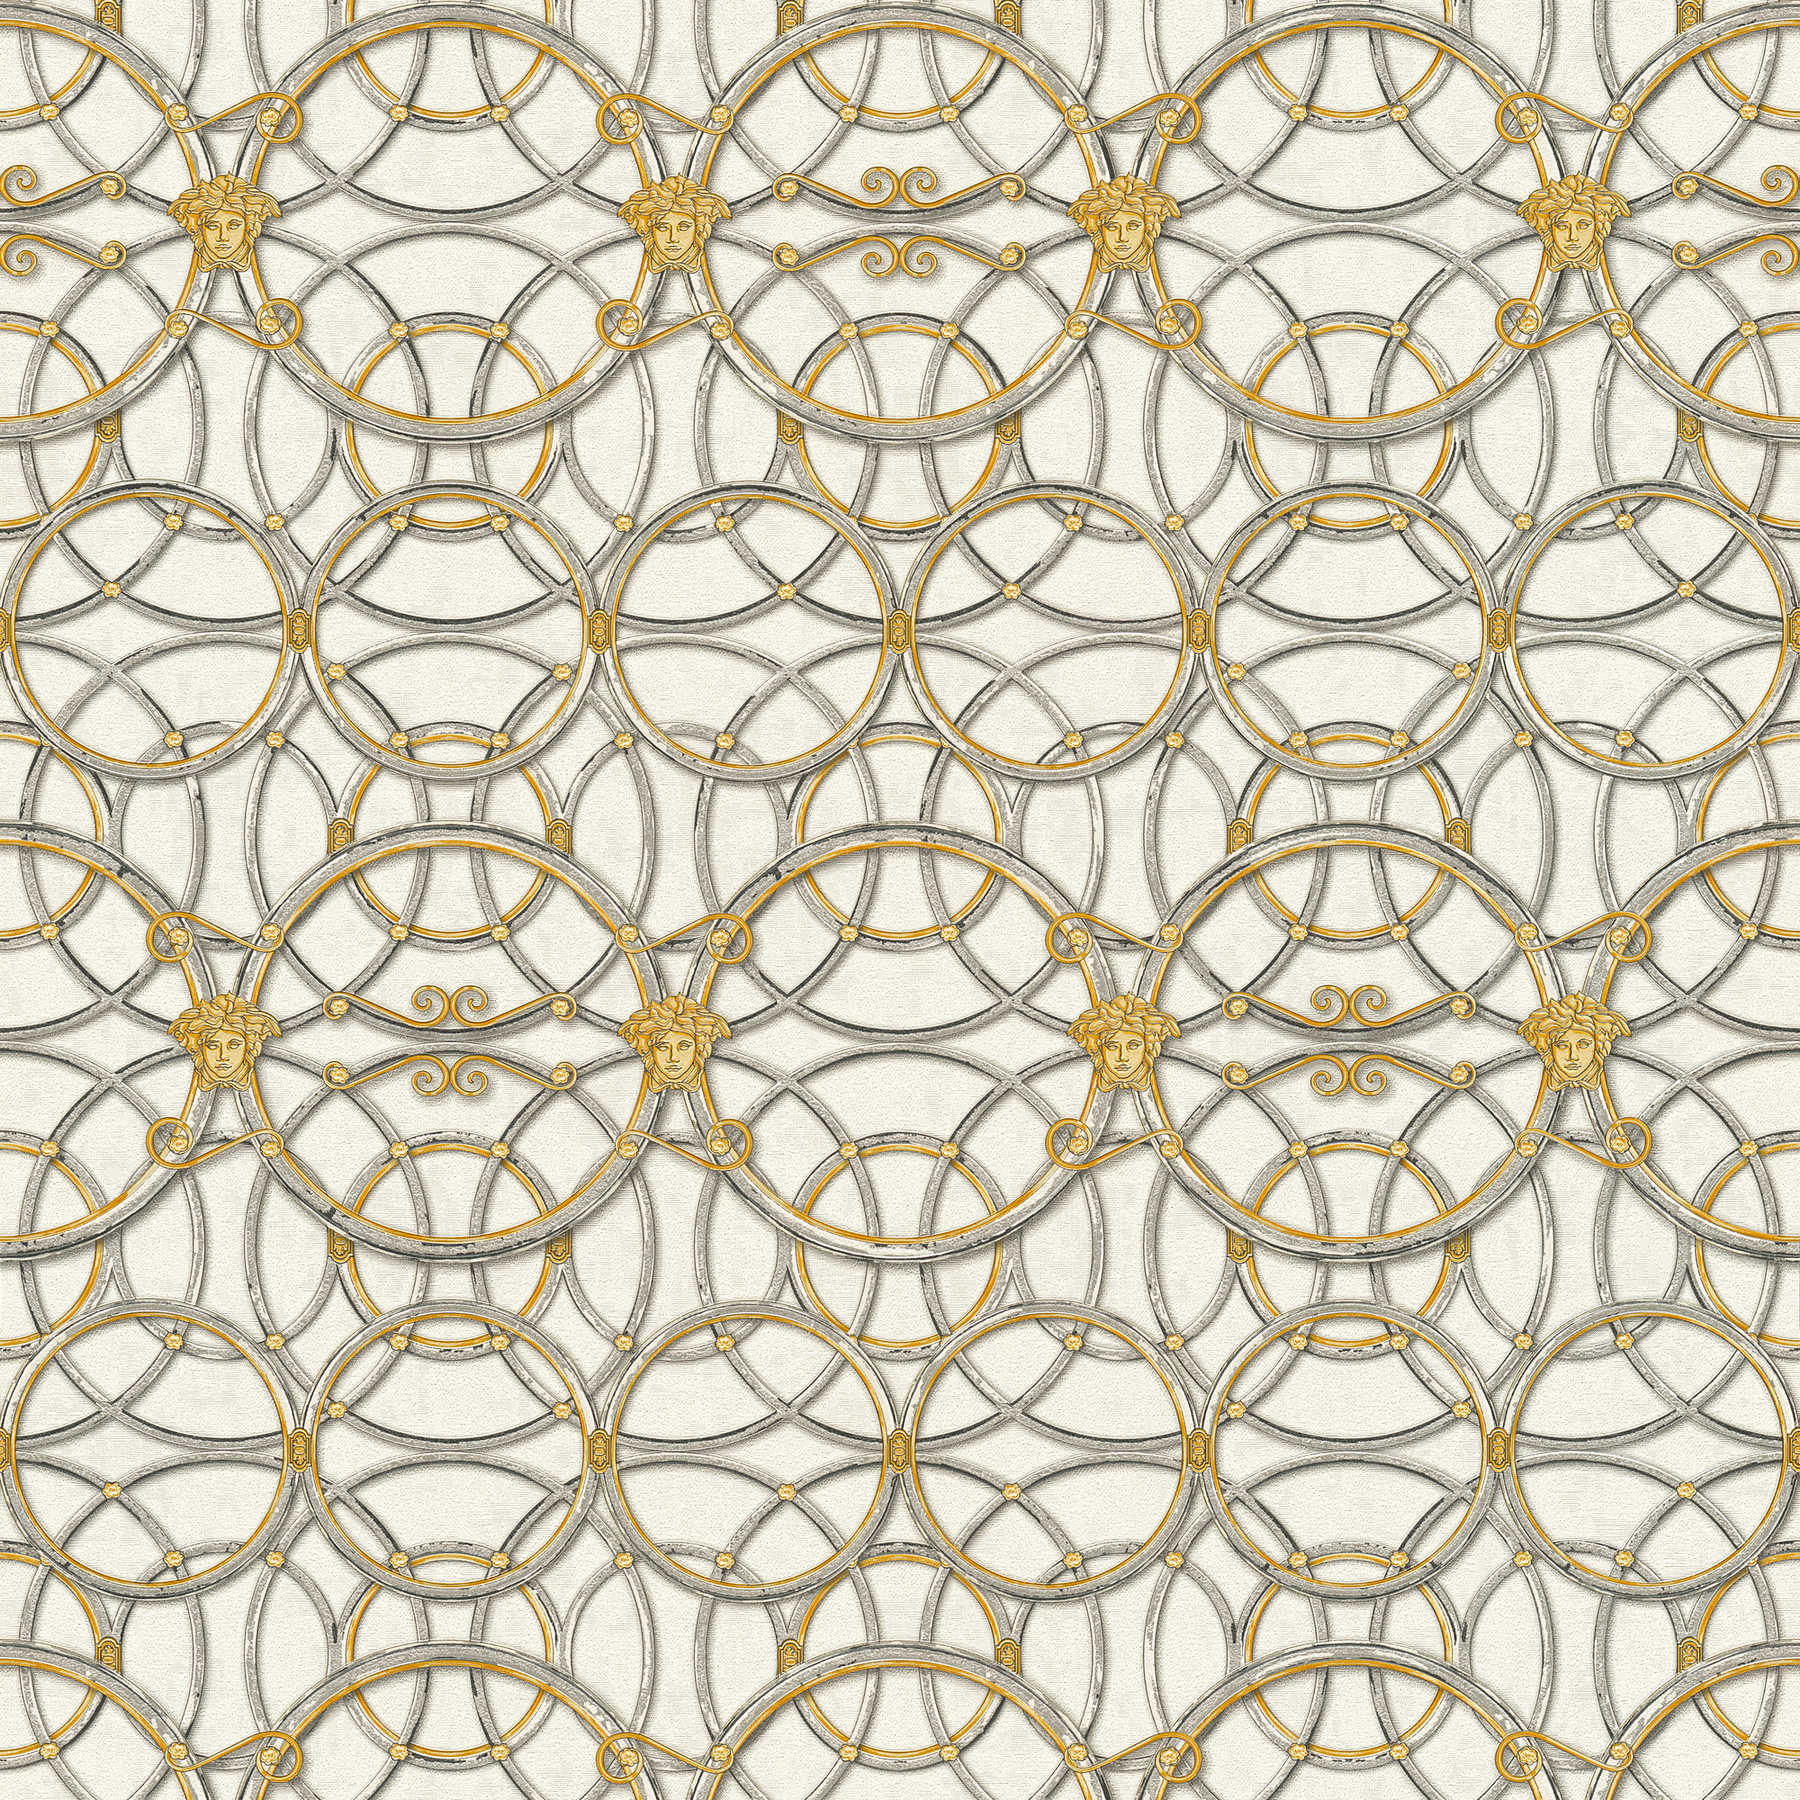 VERSACE Home wallpaper circle pattern and Medusa - gold, silver, white
